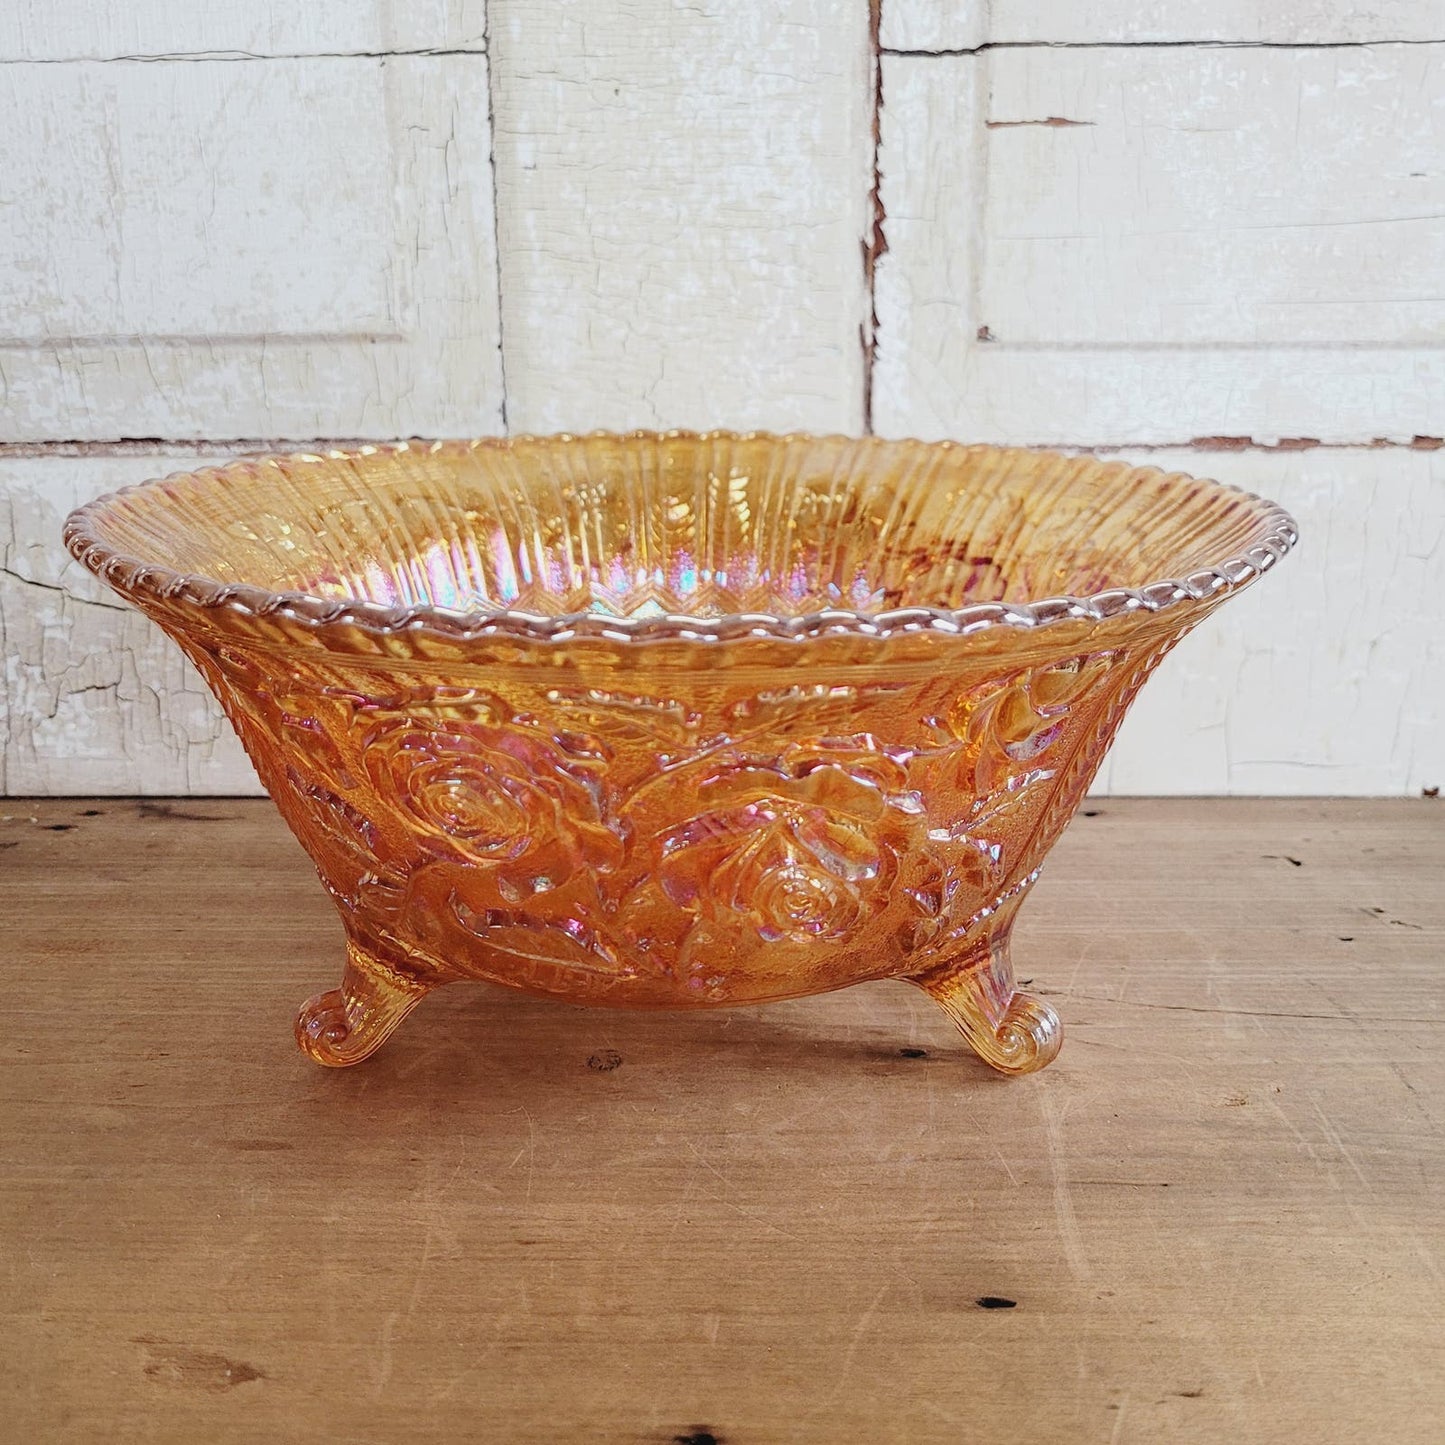 Vintage 10” Rose Carnival Glass Fruit Bowl Marigold Floral Detail with Ball Feet